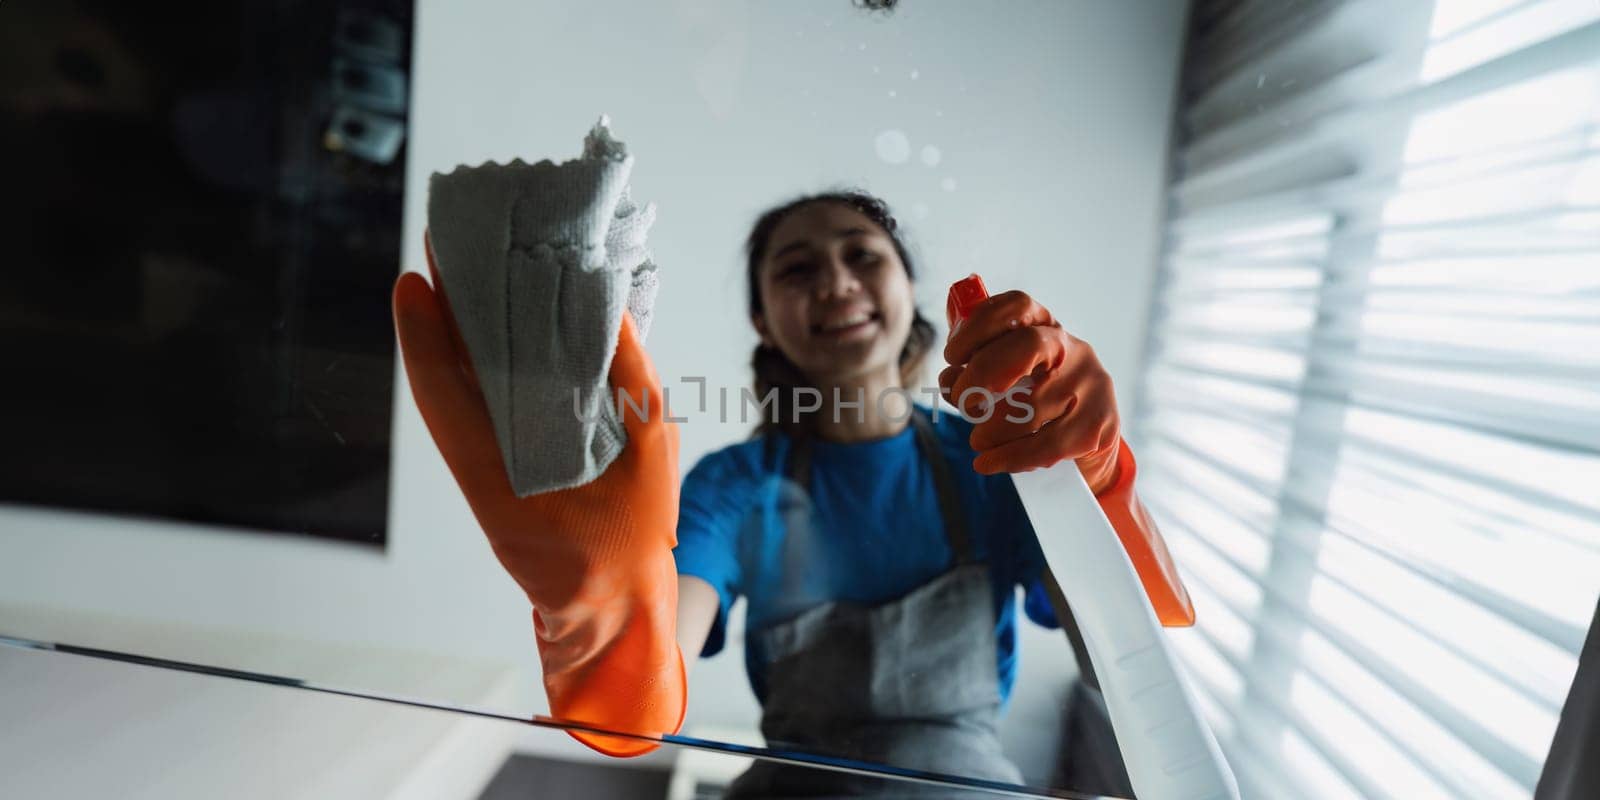 Housekeeping woman wiping the table in the living room House cleaning service concept.